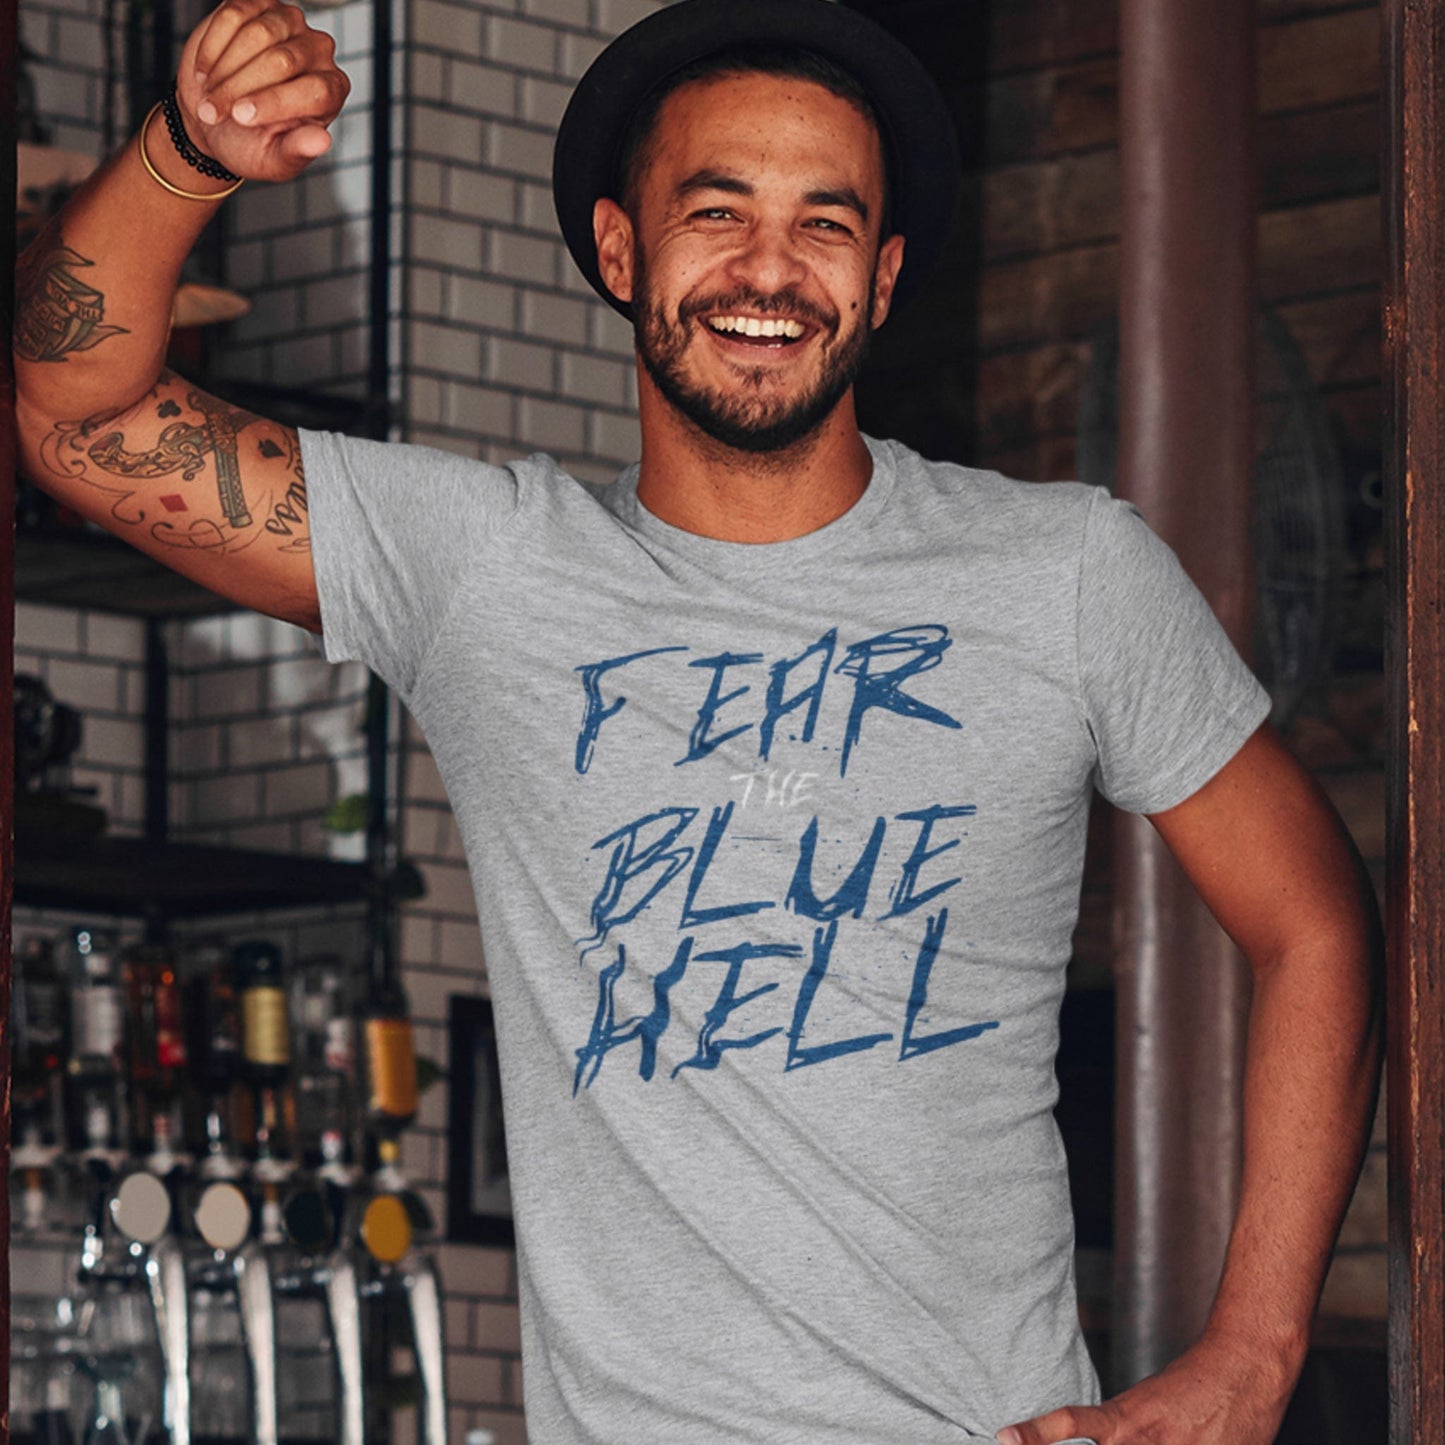 KC Swag Sporting Kansas City navy blue/white FEAR THE BLUE HELL on athletic heather grey t-shirt worn by male model standing in pub doorway